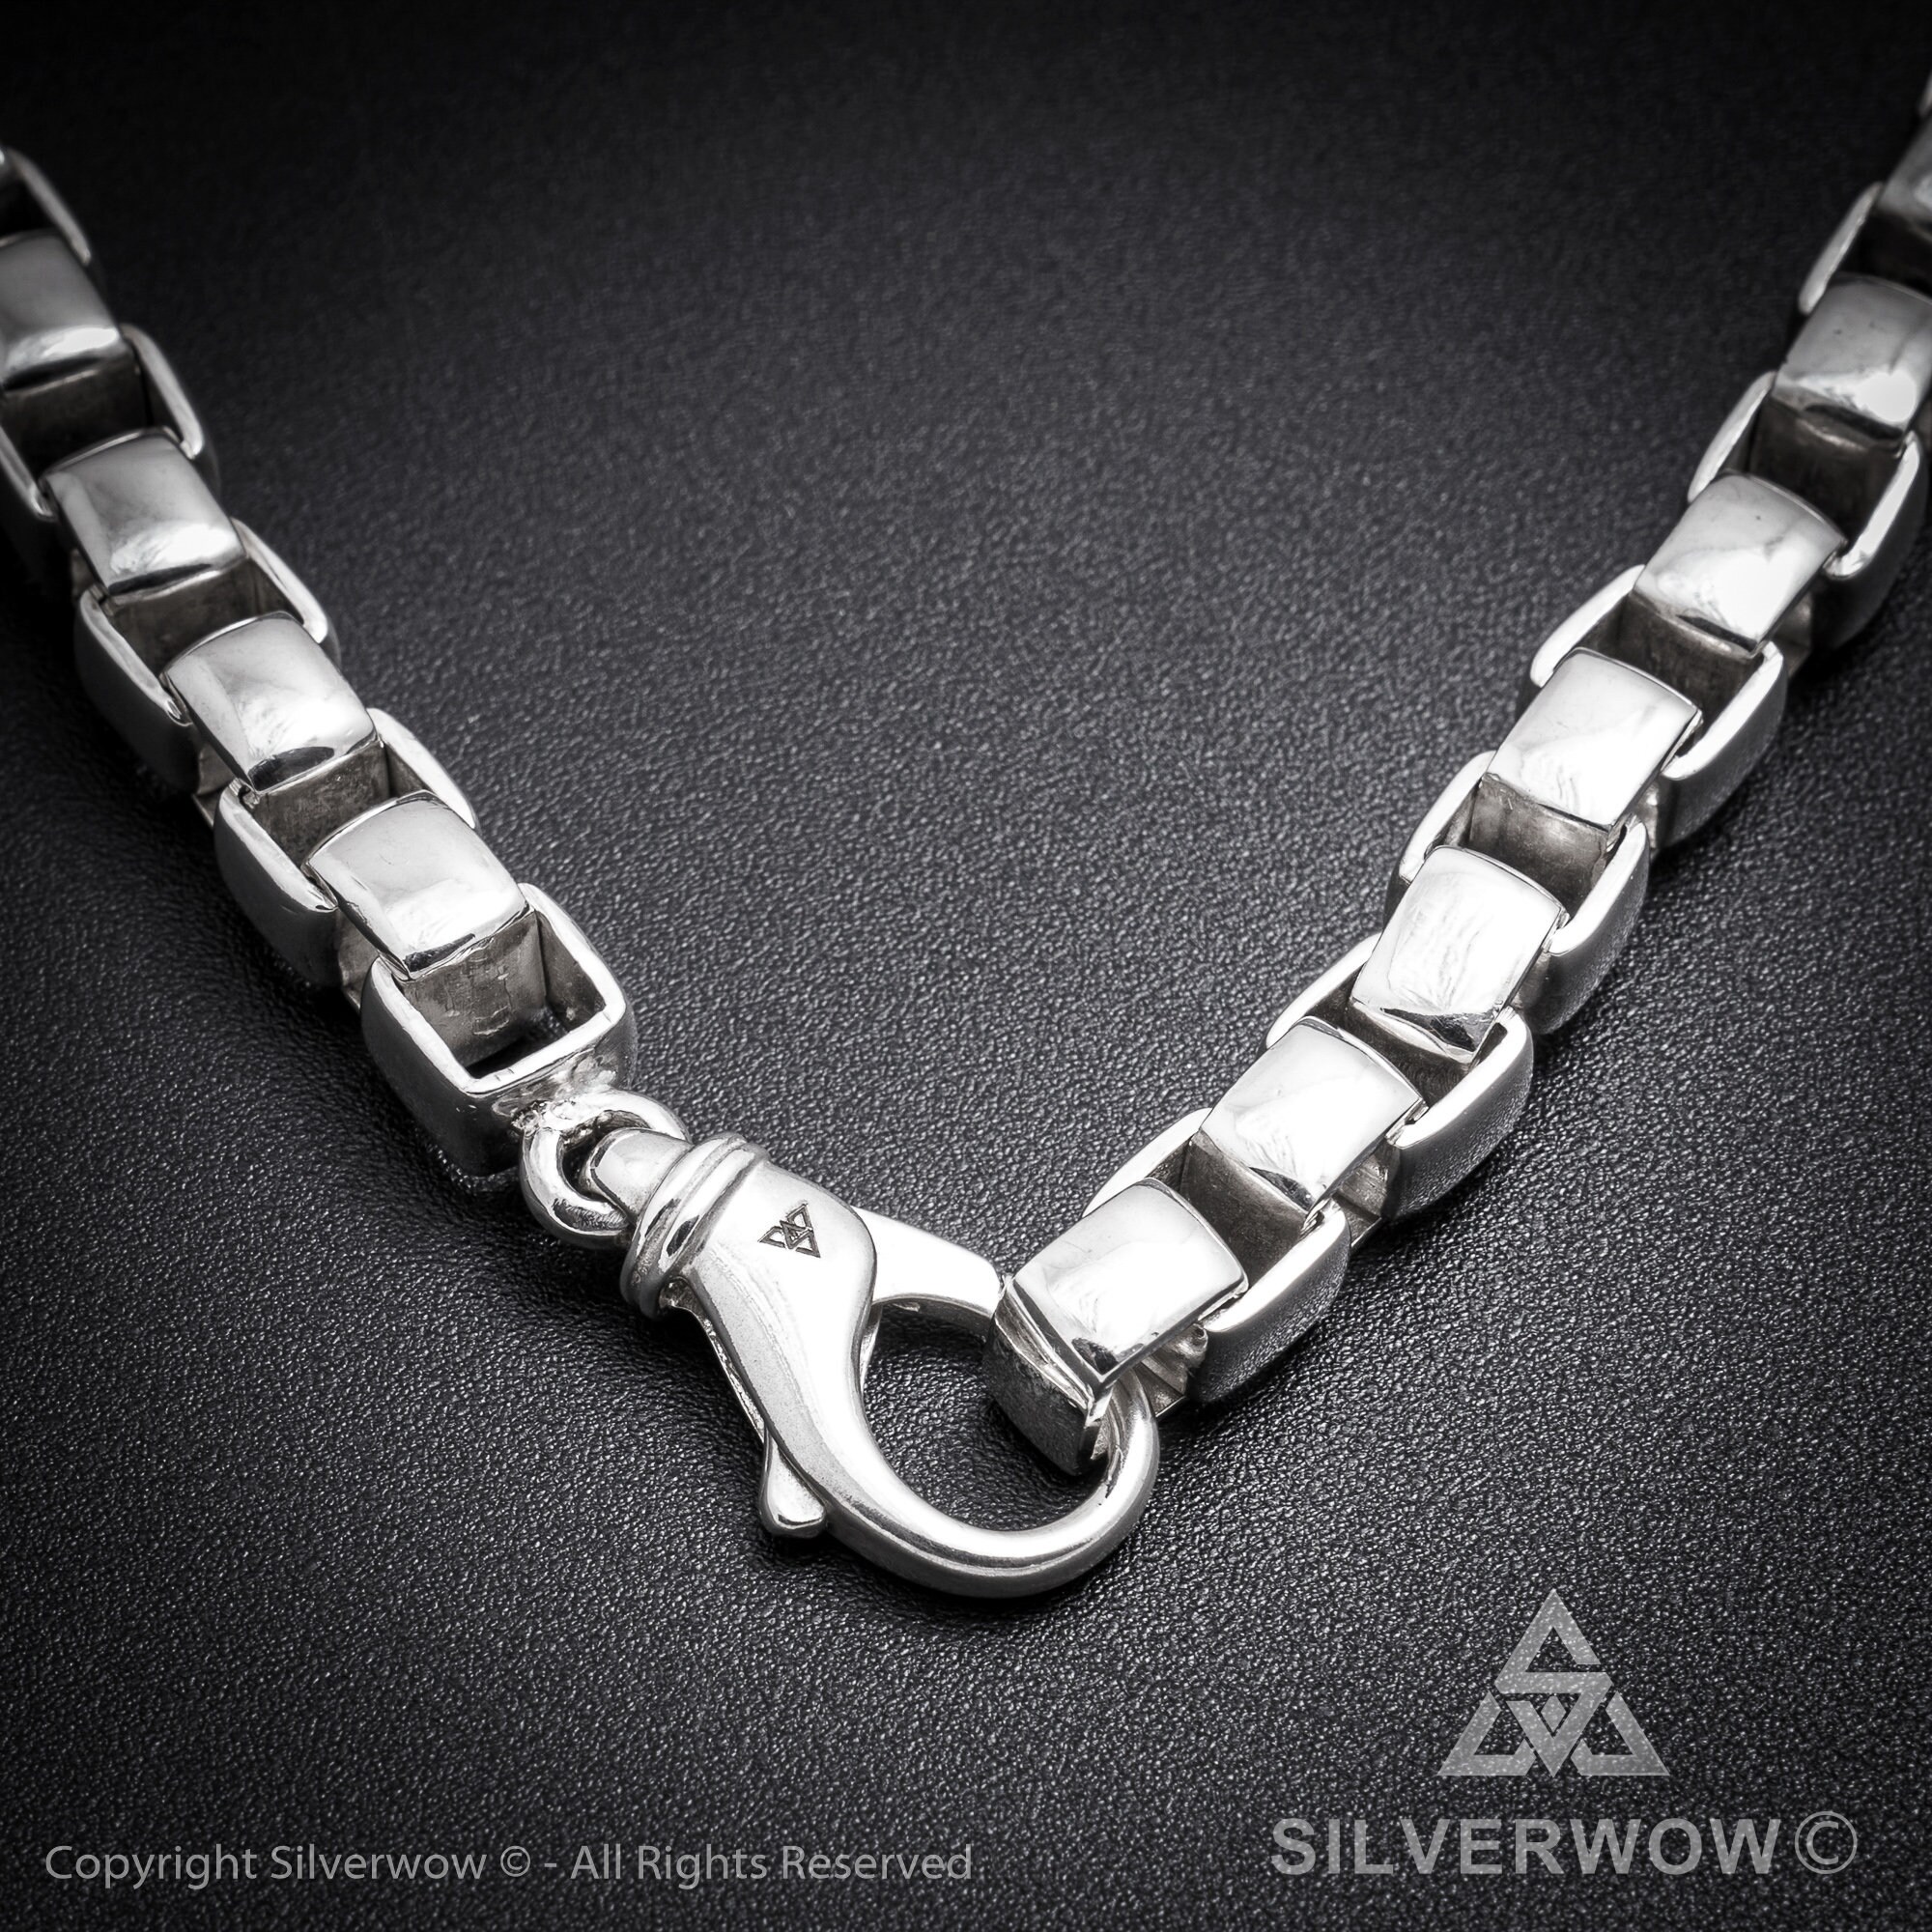 Men's Necklace - Burnish Silver Box Chain Necklace 3.5mm - Masculine Chain - Stainless Chain - Waterproof Jewelry - Necklace by Modern Out